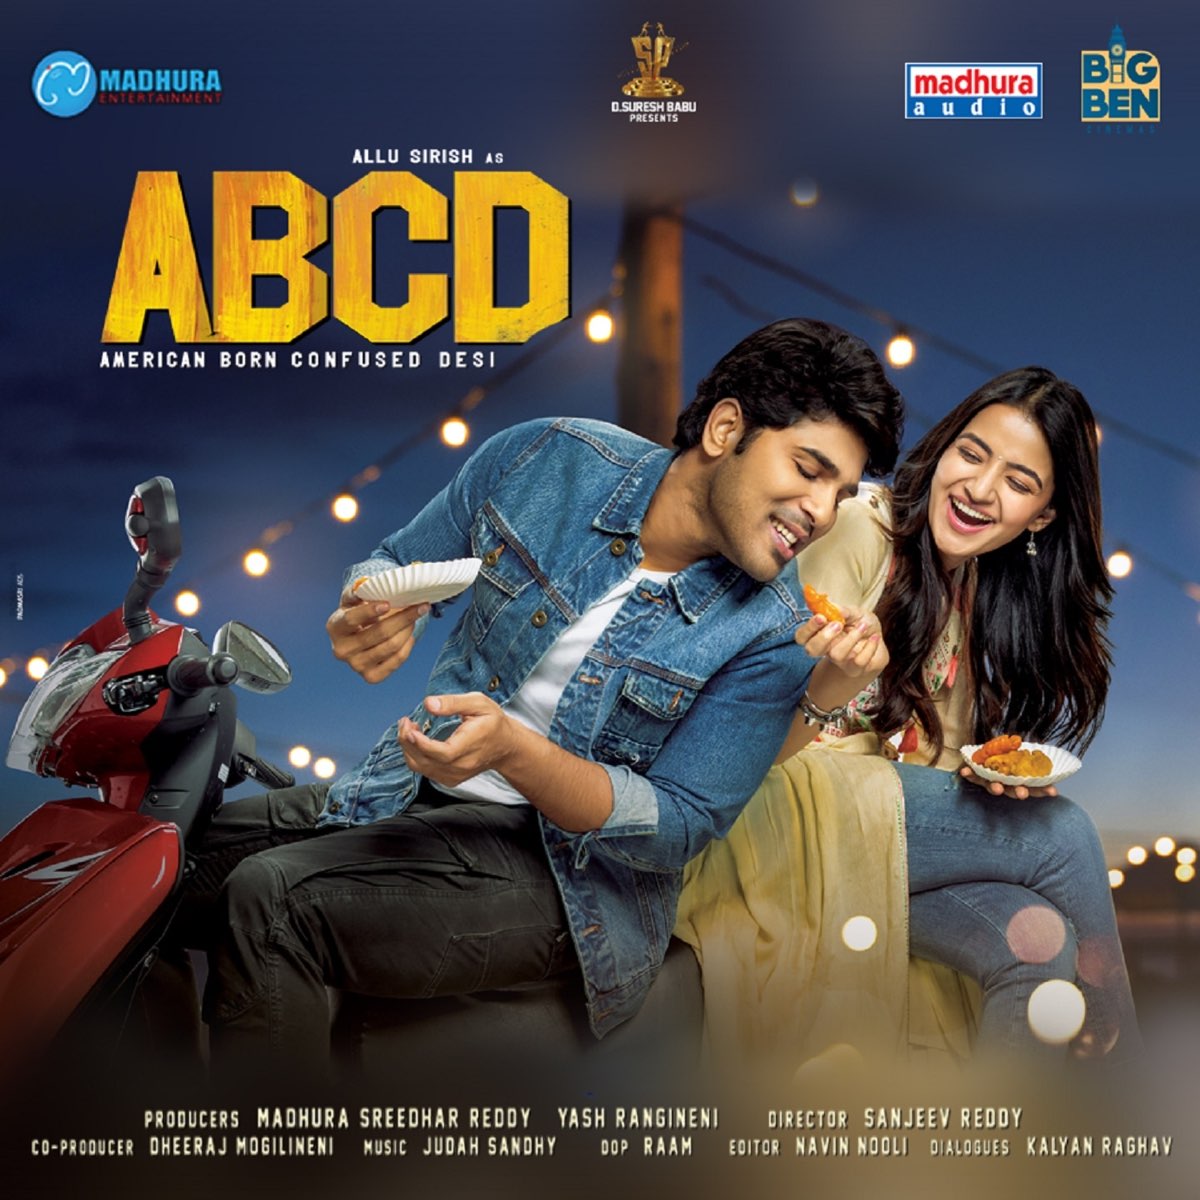 ABCD - American Born Confused Desi (Original Motion Picture Soundtrack) by  Judah Sandhy on Apple Music